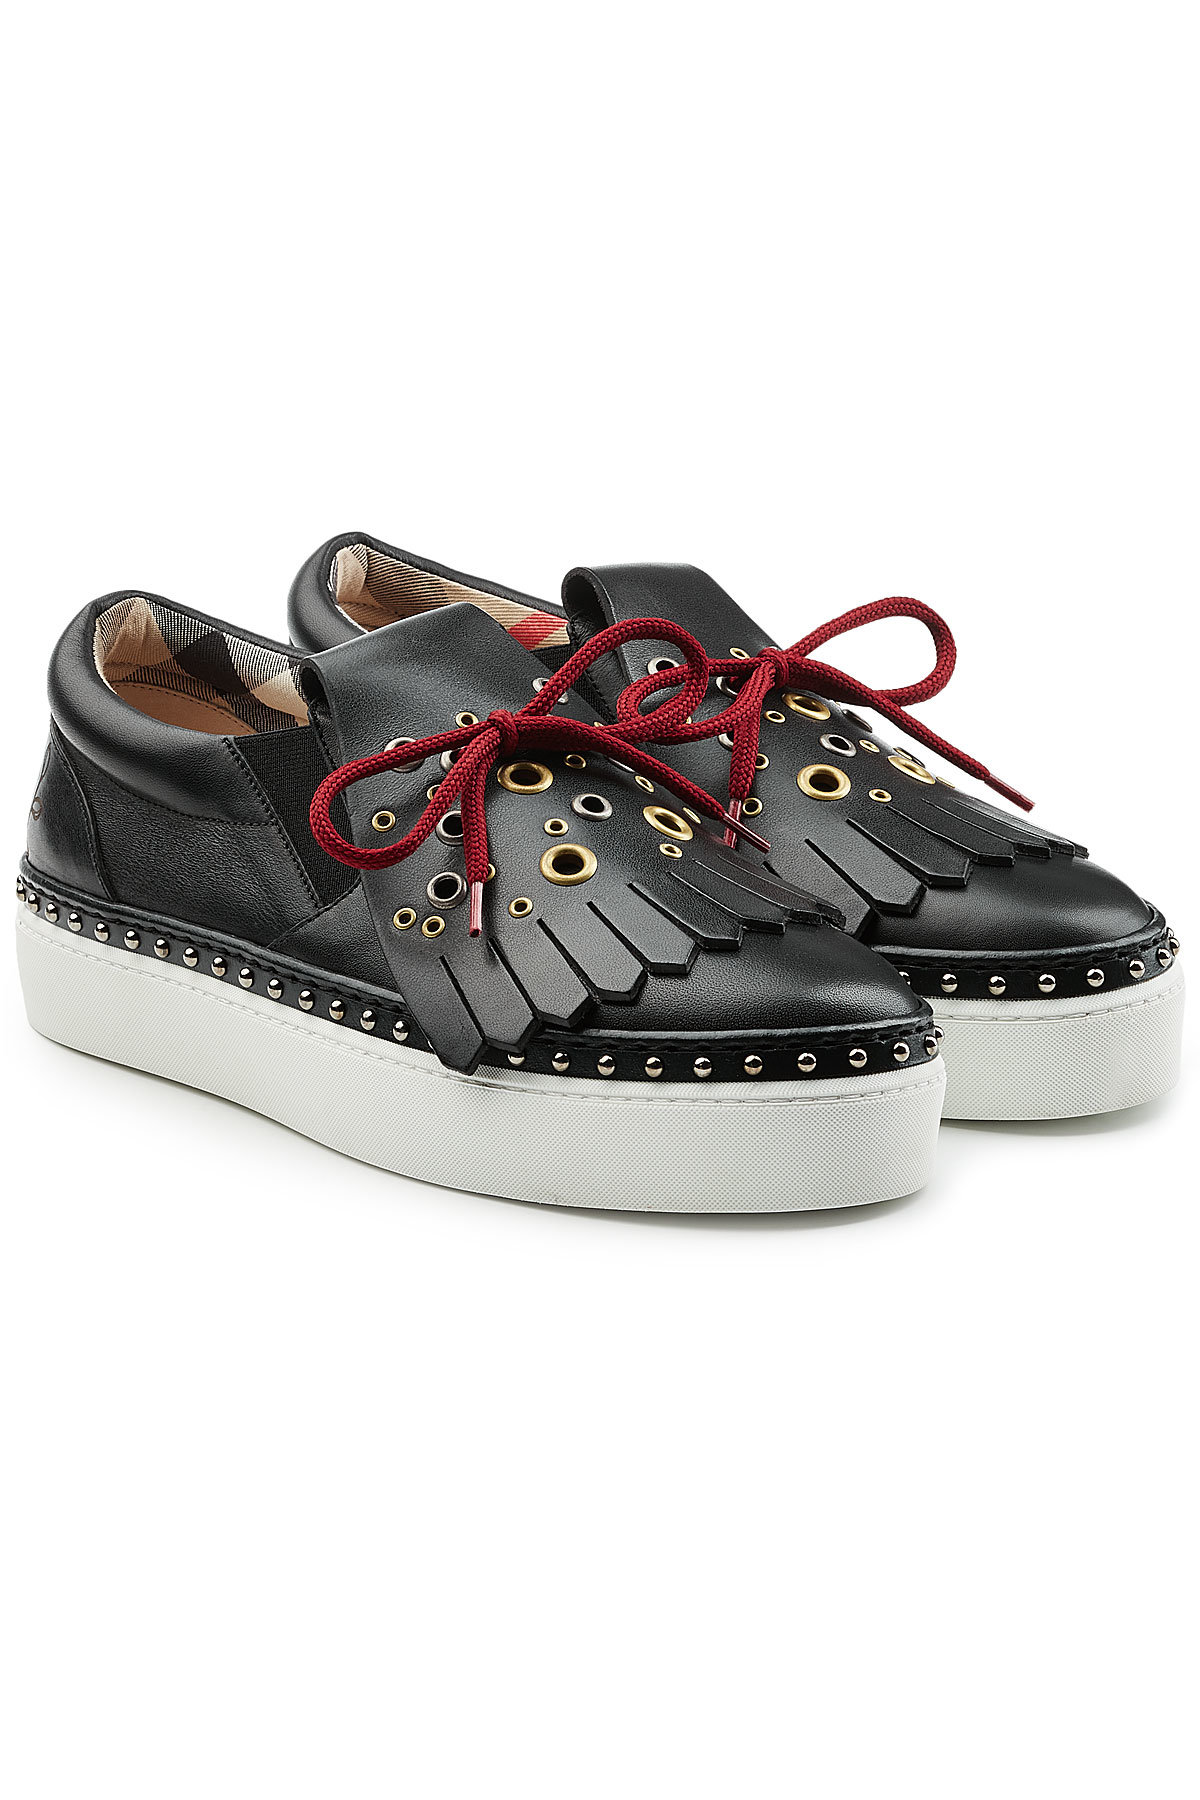 Burberry - Embellished Leather Creeper Sneakers